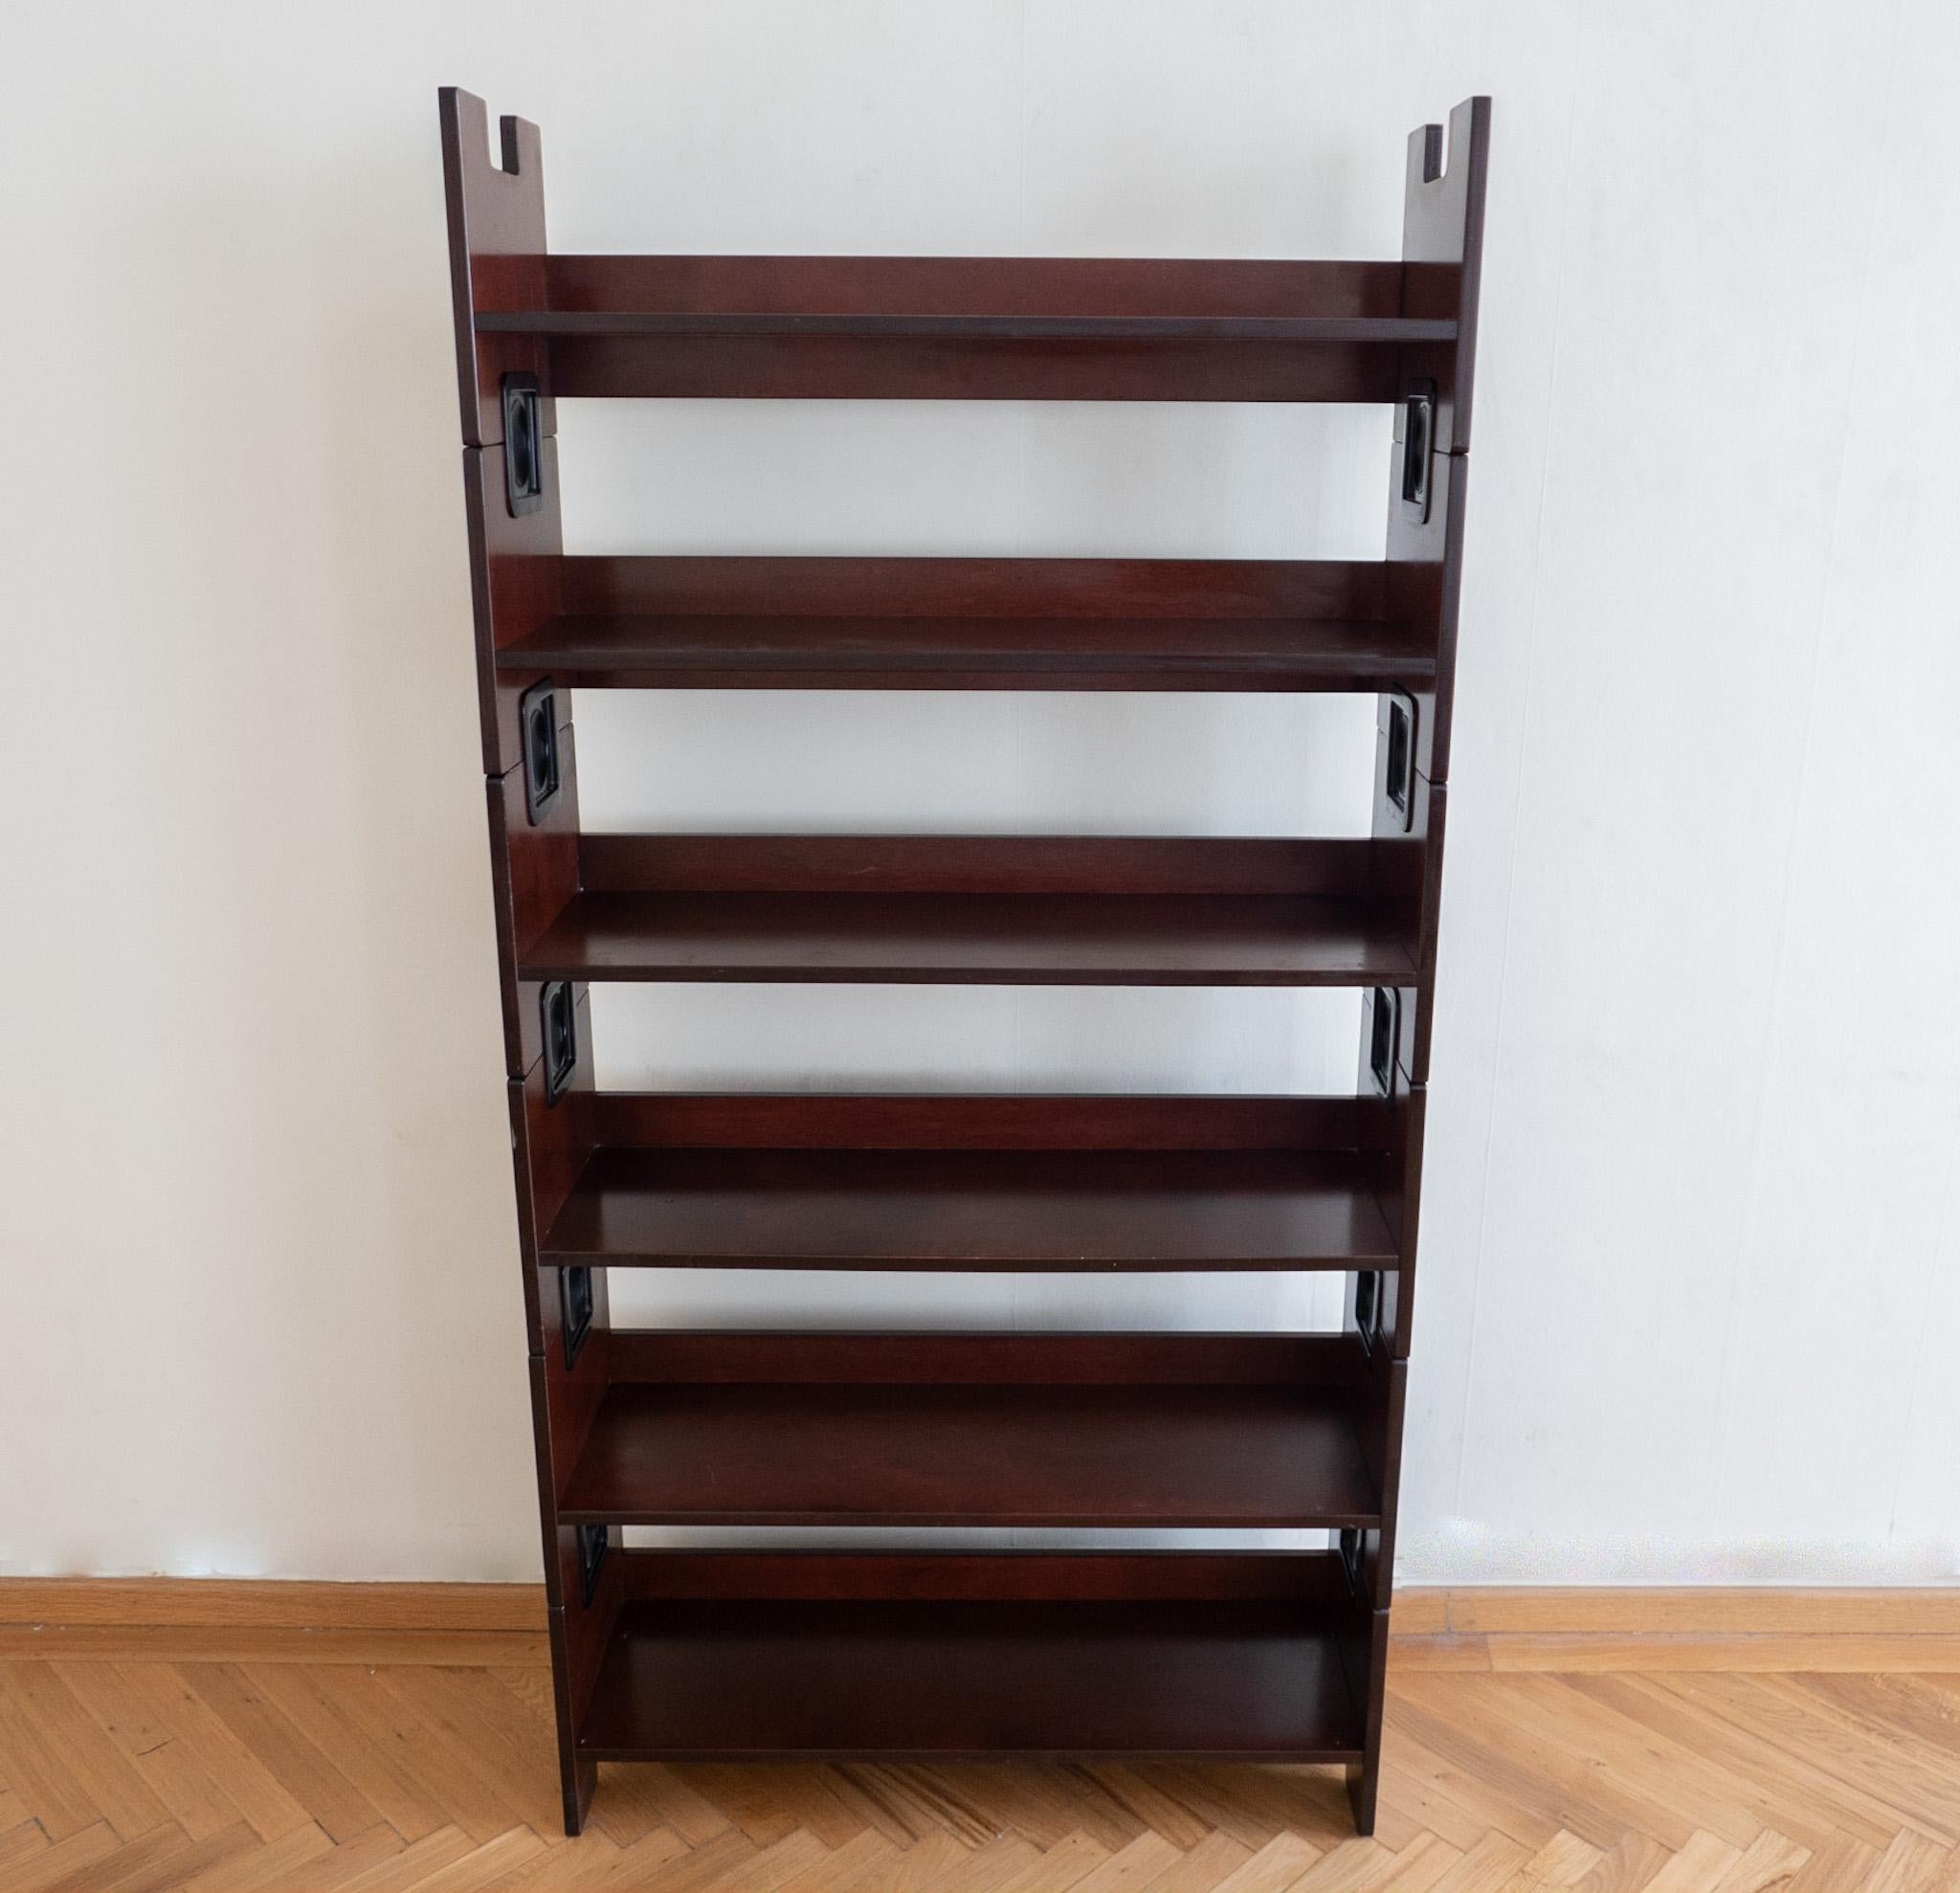 Mid-Century Modern Brown Wooden Stackable Bookcase by BBB Bonacina, Italy 70s.

Introducing the BBB Bonacina Stackable Veneer Wood Bookcase with Black Plastic Accents - A Contemporary Storage Marvel!

Discover the perfect blend of form and